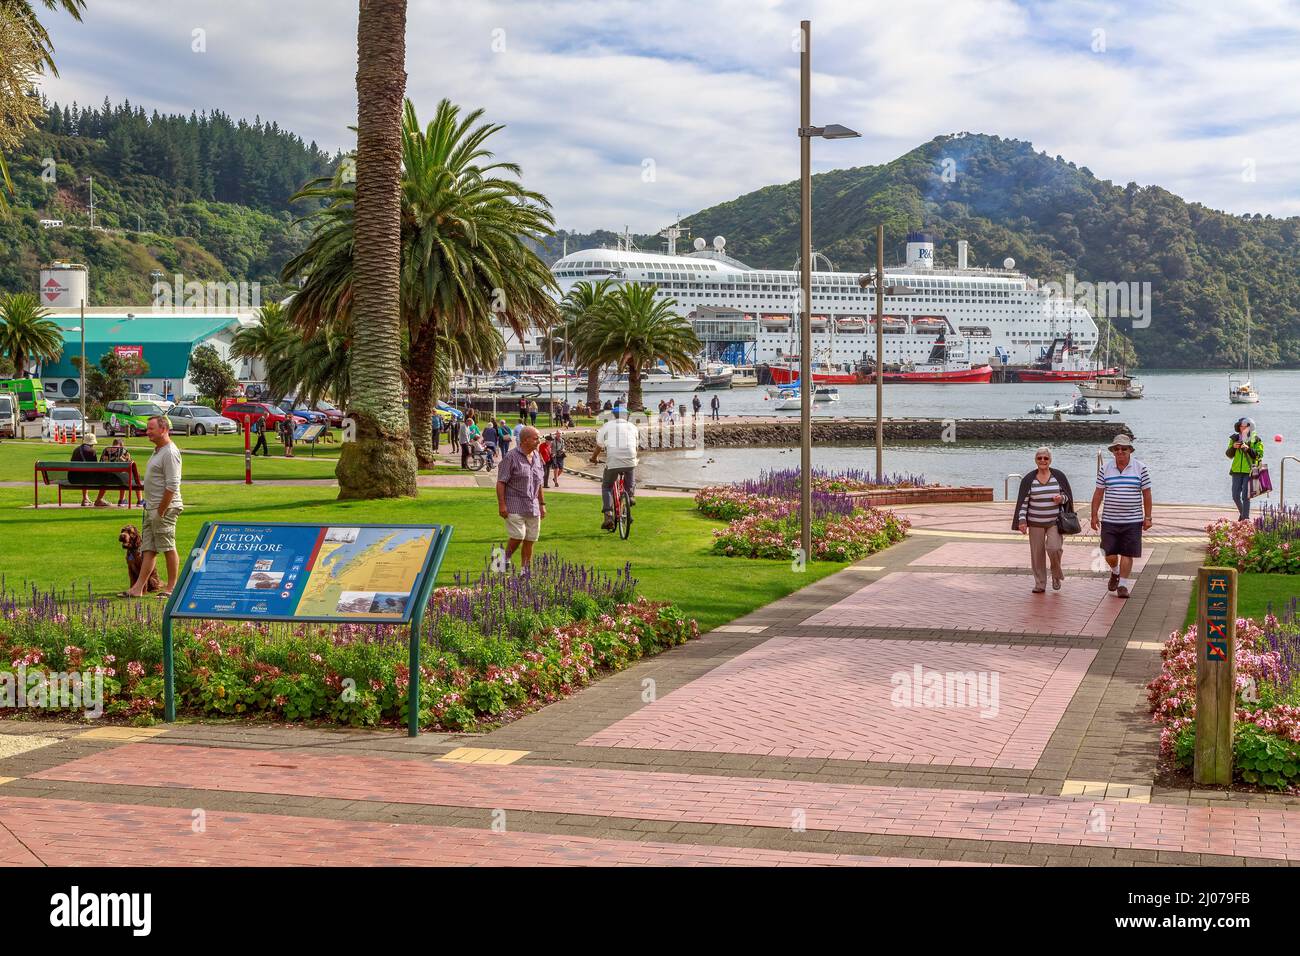 A waterfront park in Picton, a town in the South Island of New Zealand. A cruise ship is in port Stock Photo